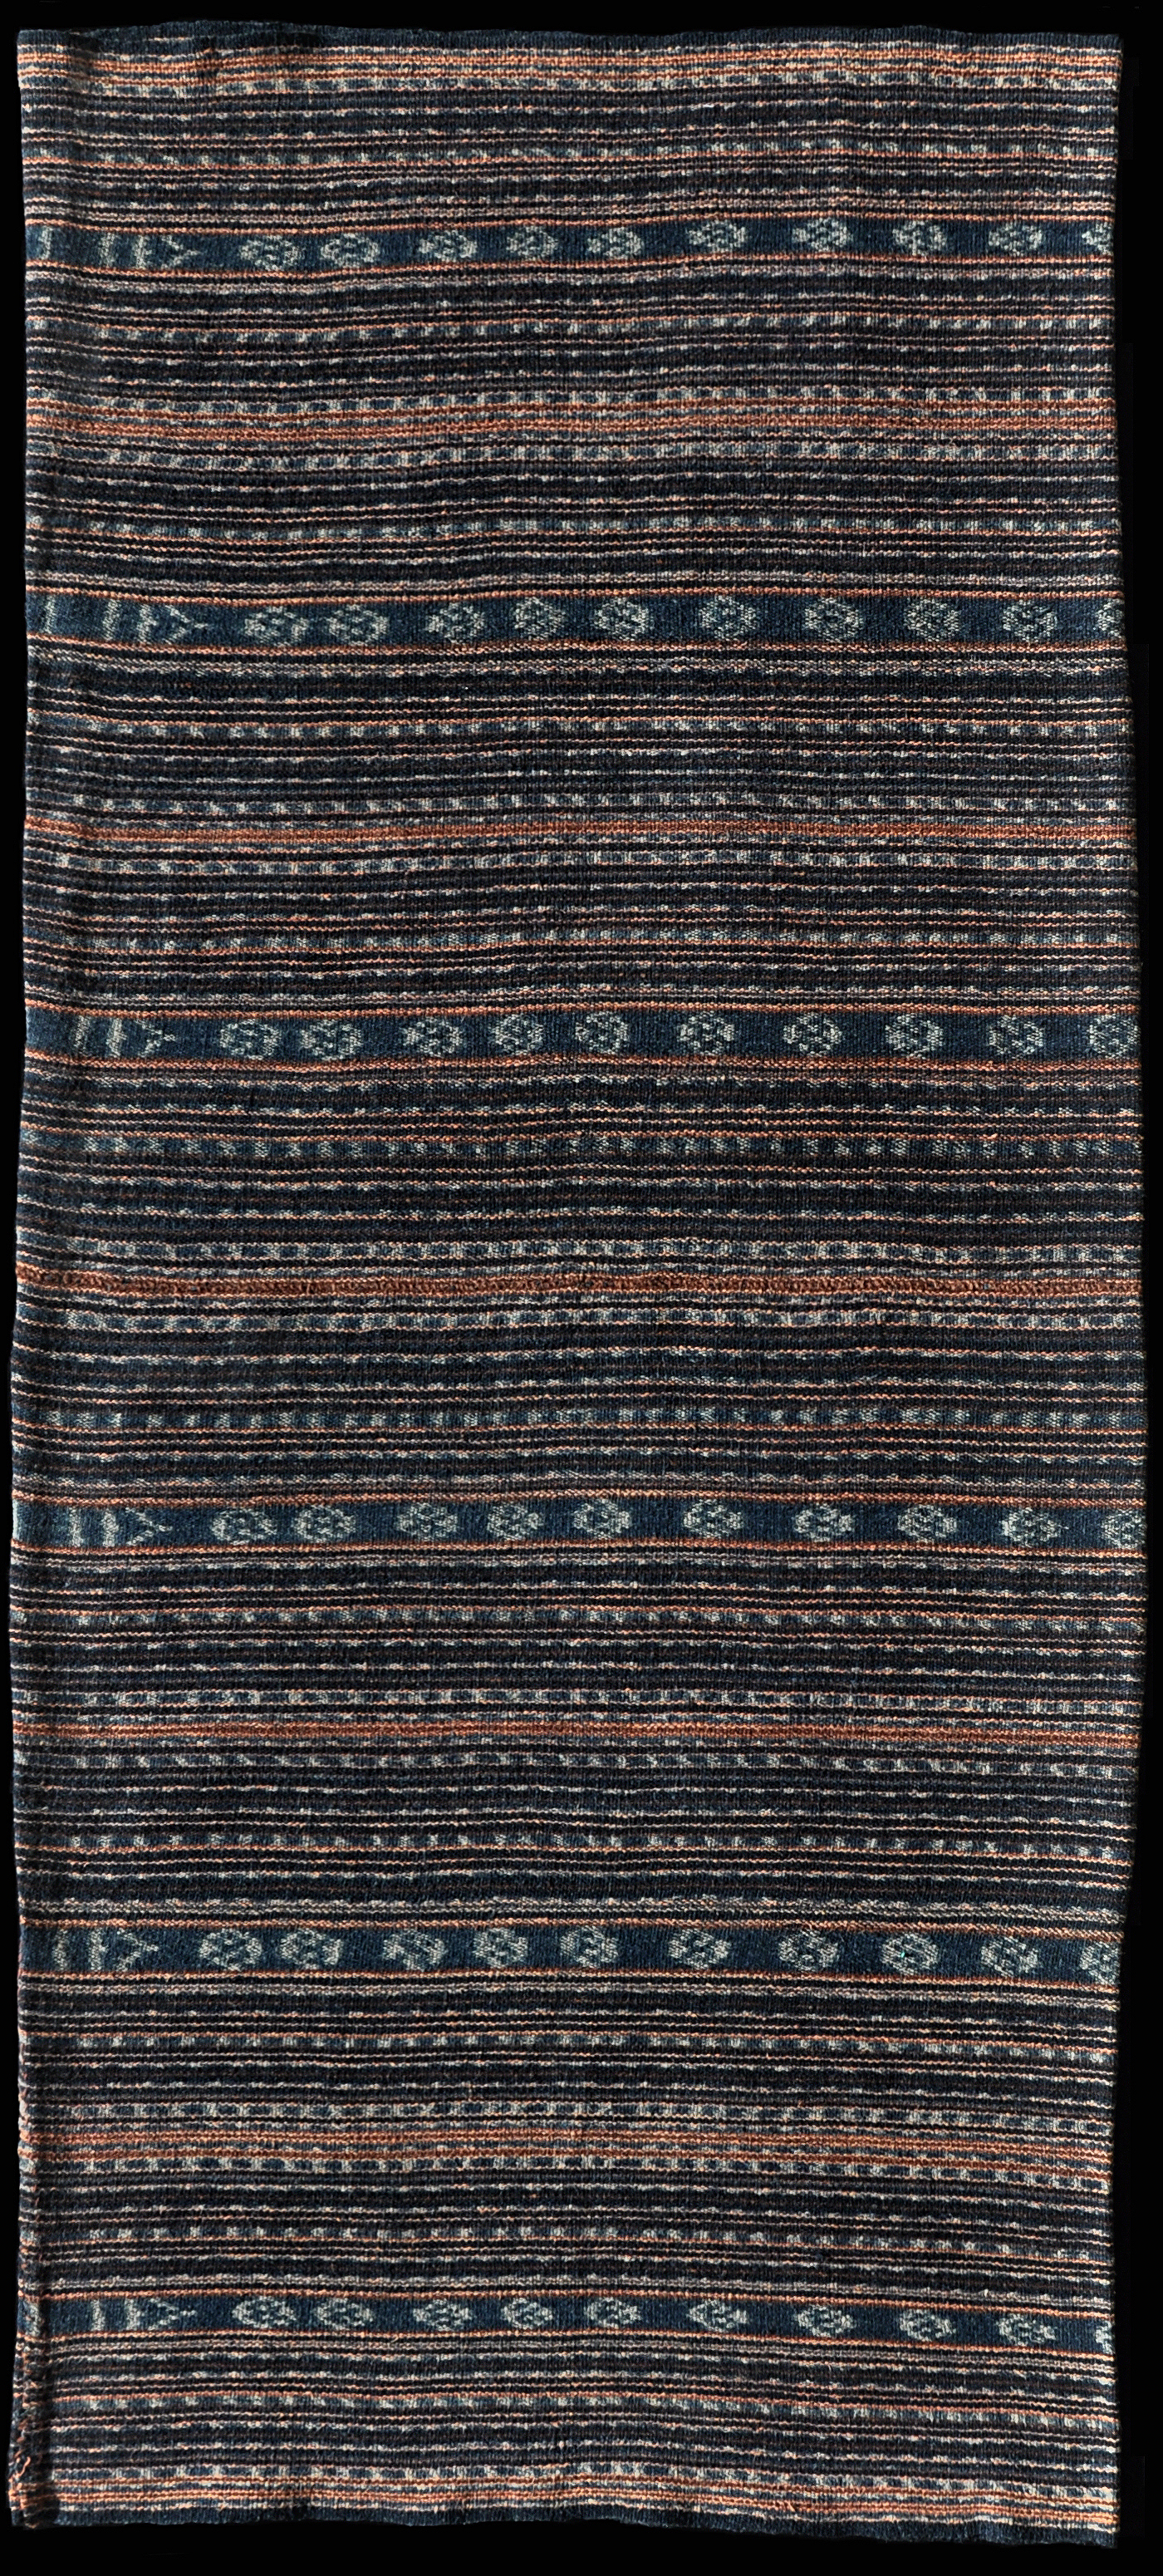 Ikat from Solor, Solor Archipelago, Indonesia